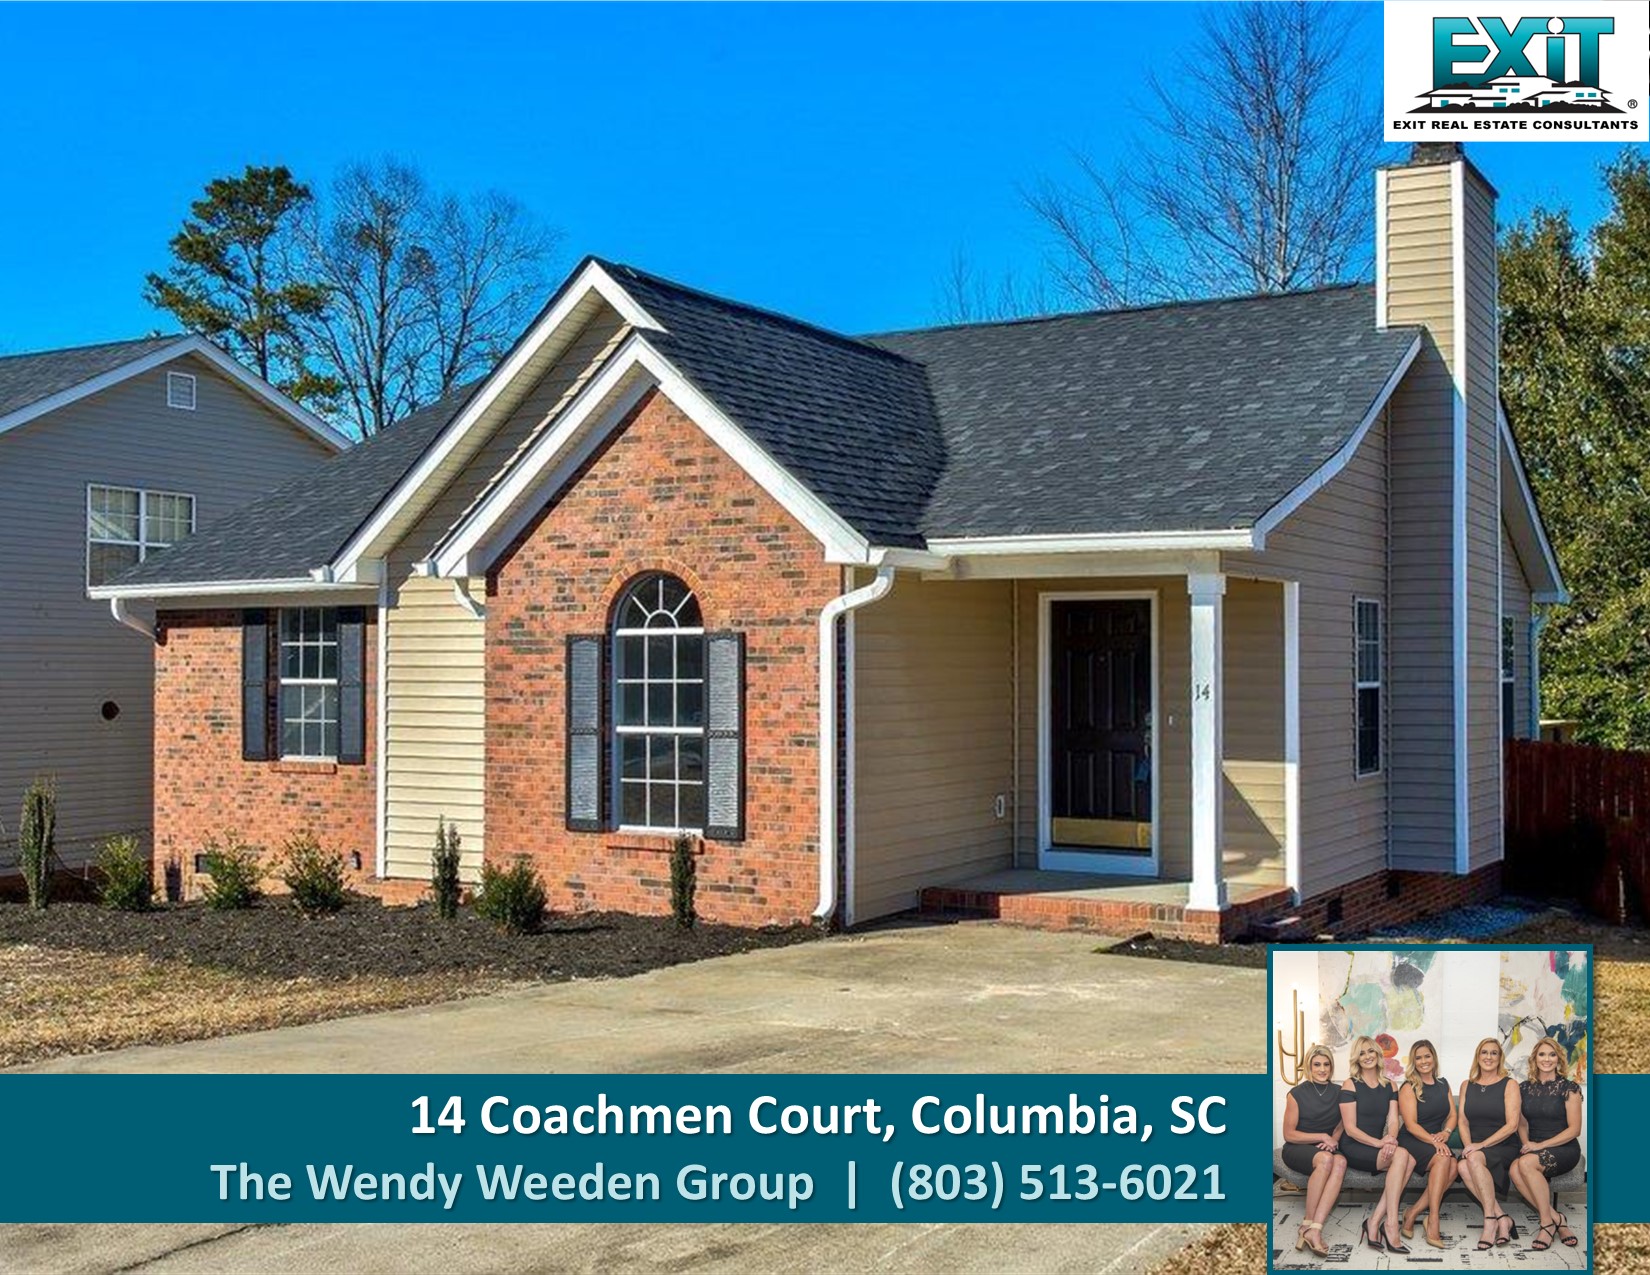 Just listed in Carriage Oaks